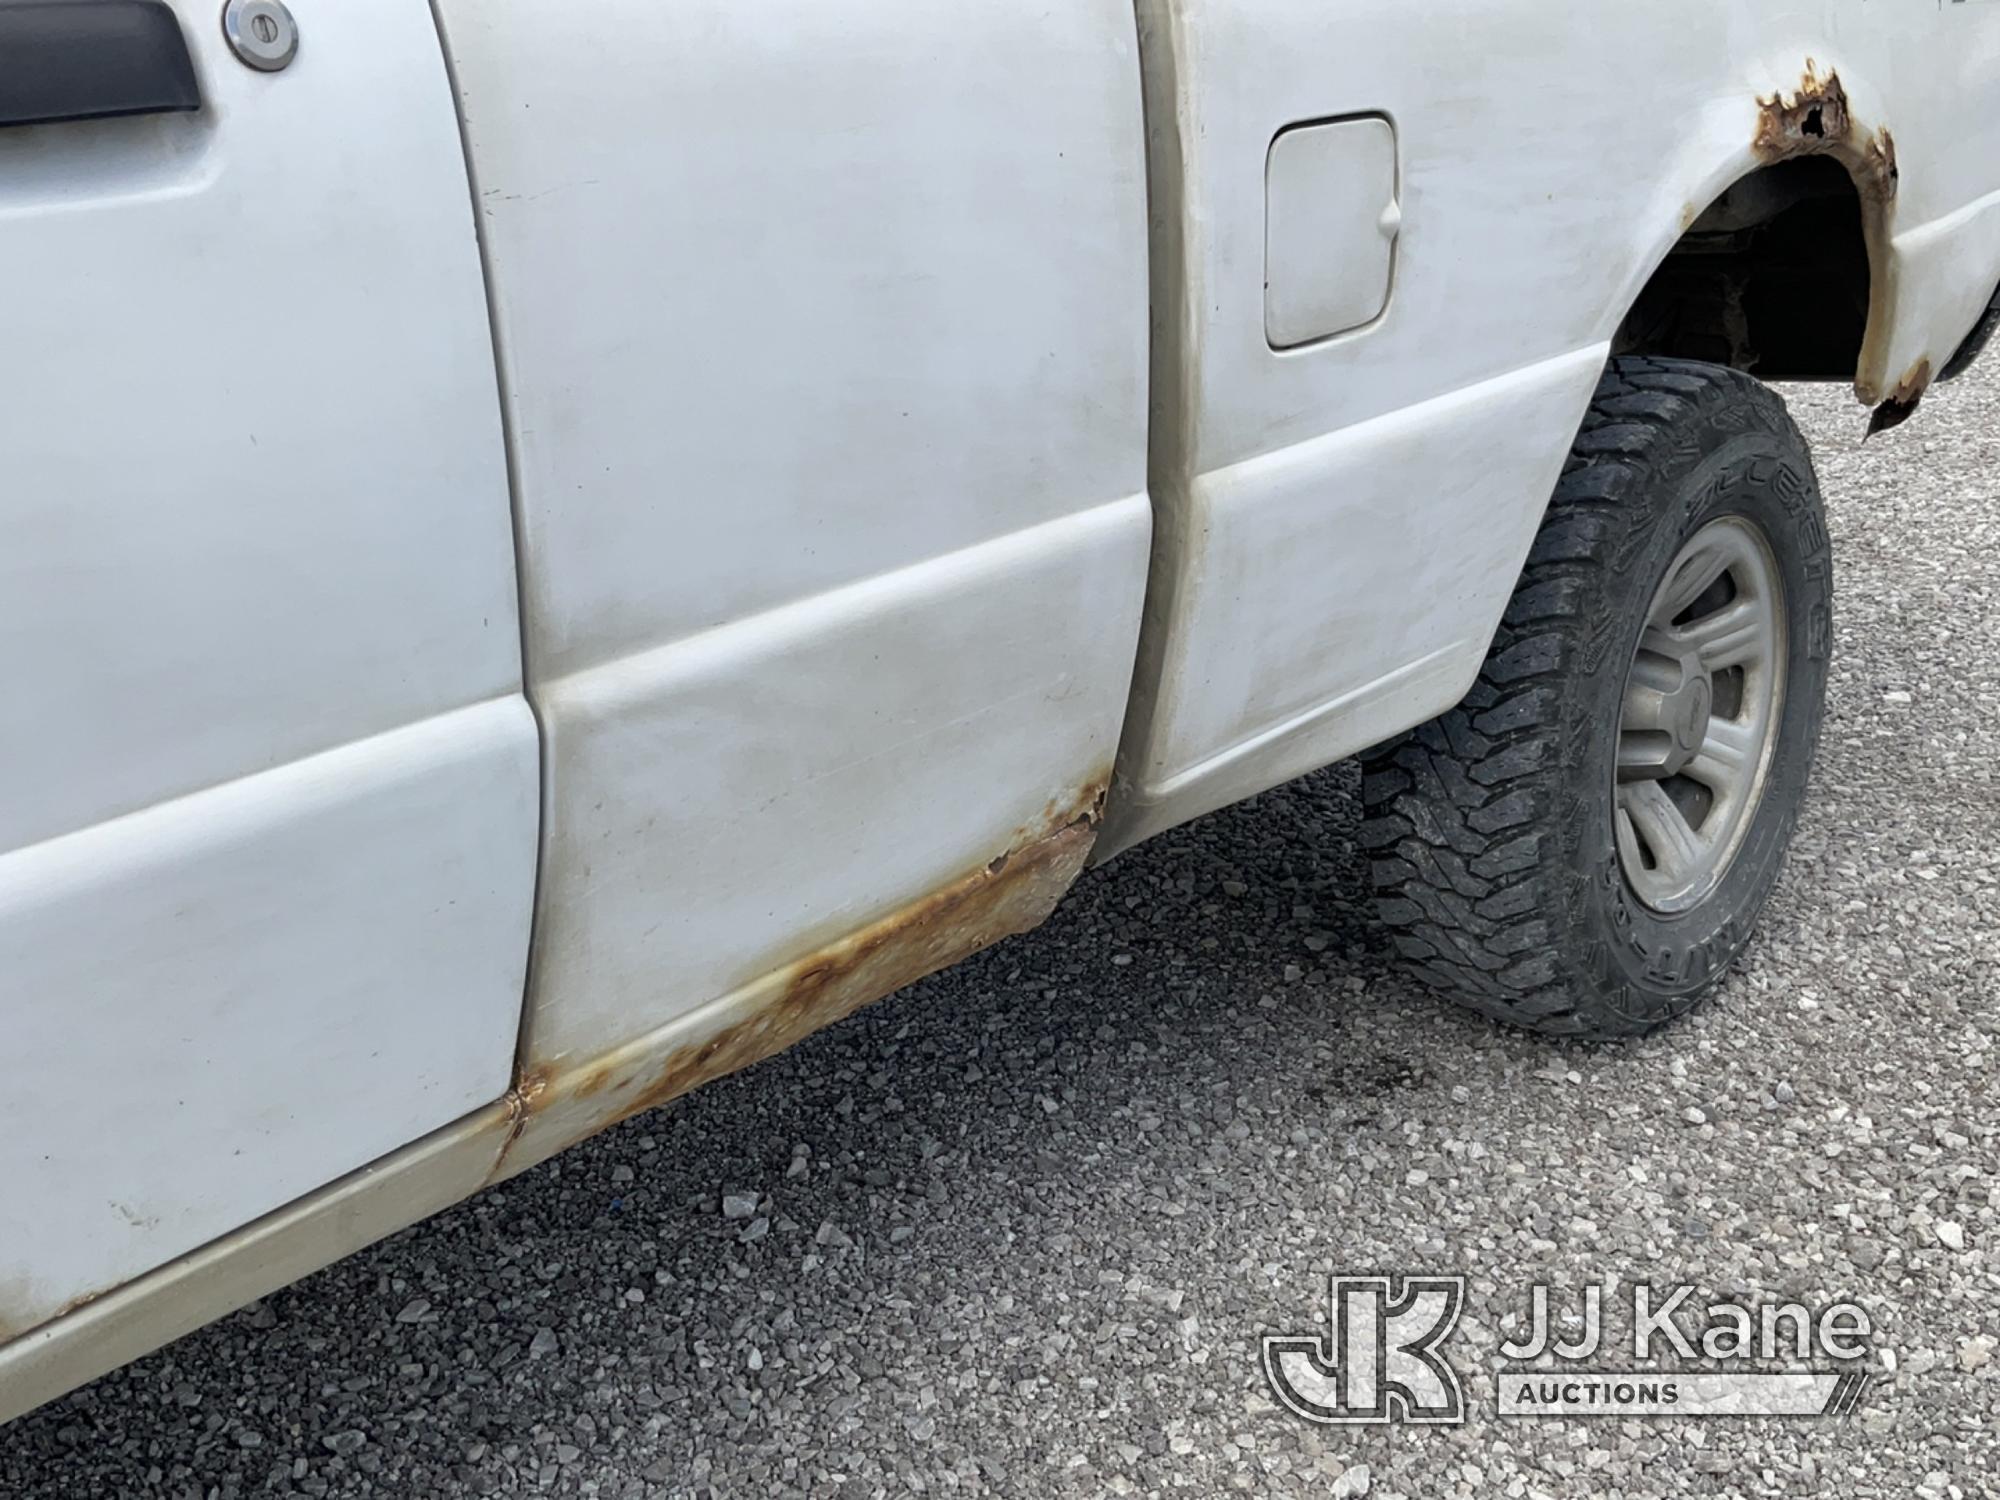 (Verona, KY) 2009 Ford Ranger 4x4 Extended-Cab Pickup Truck Runs & Moves) (Rust Damage, Cracked Wind